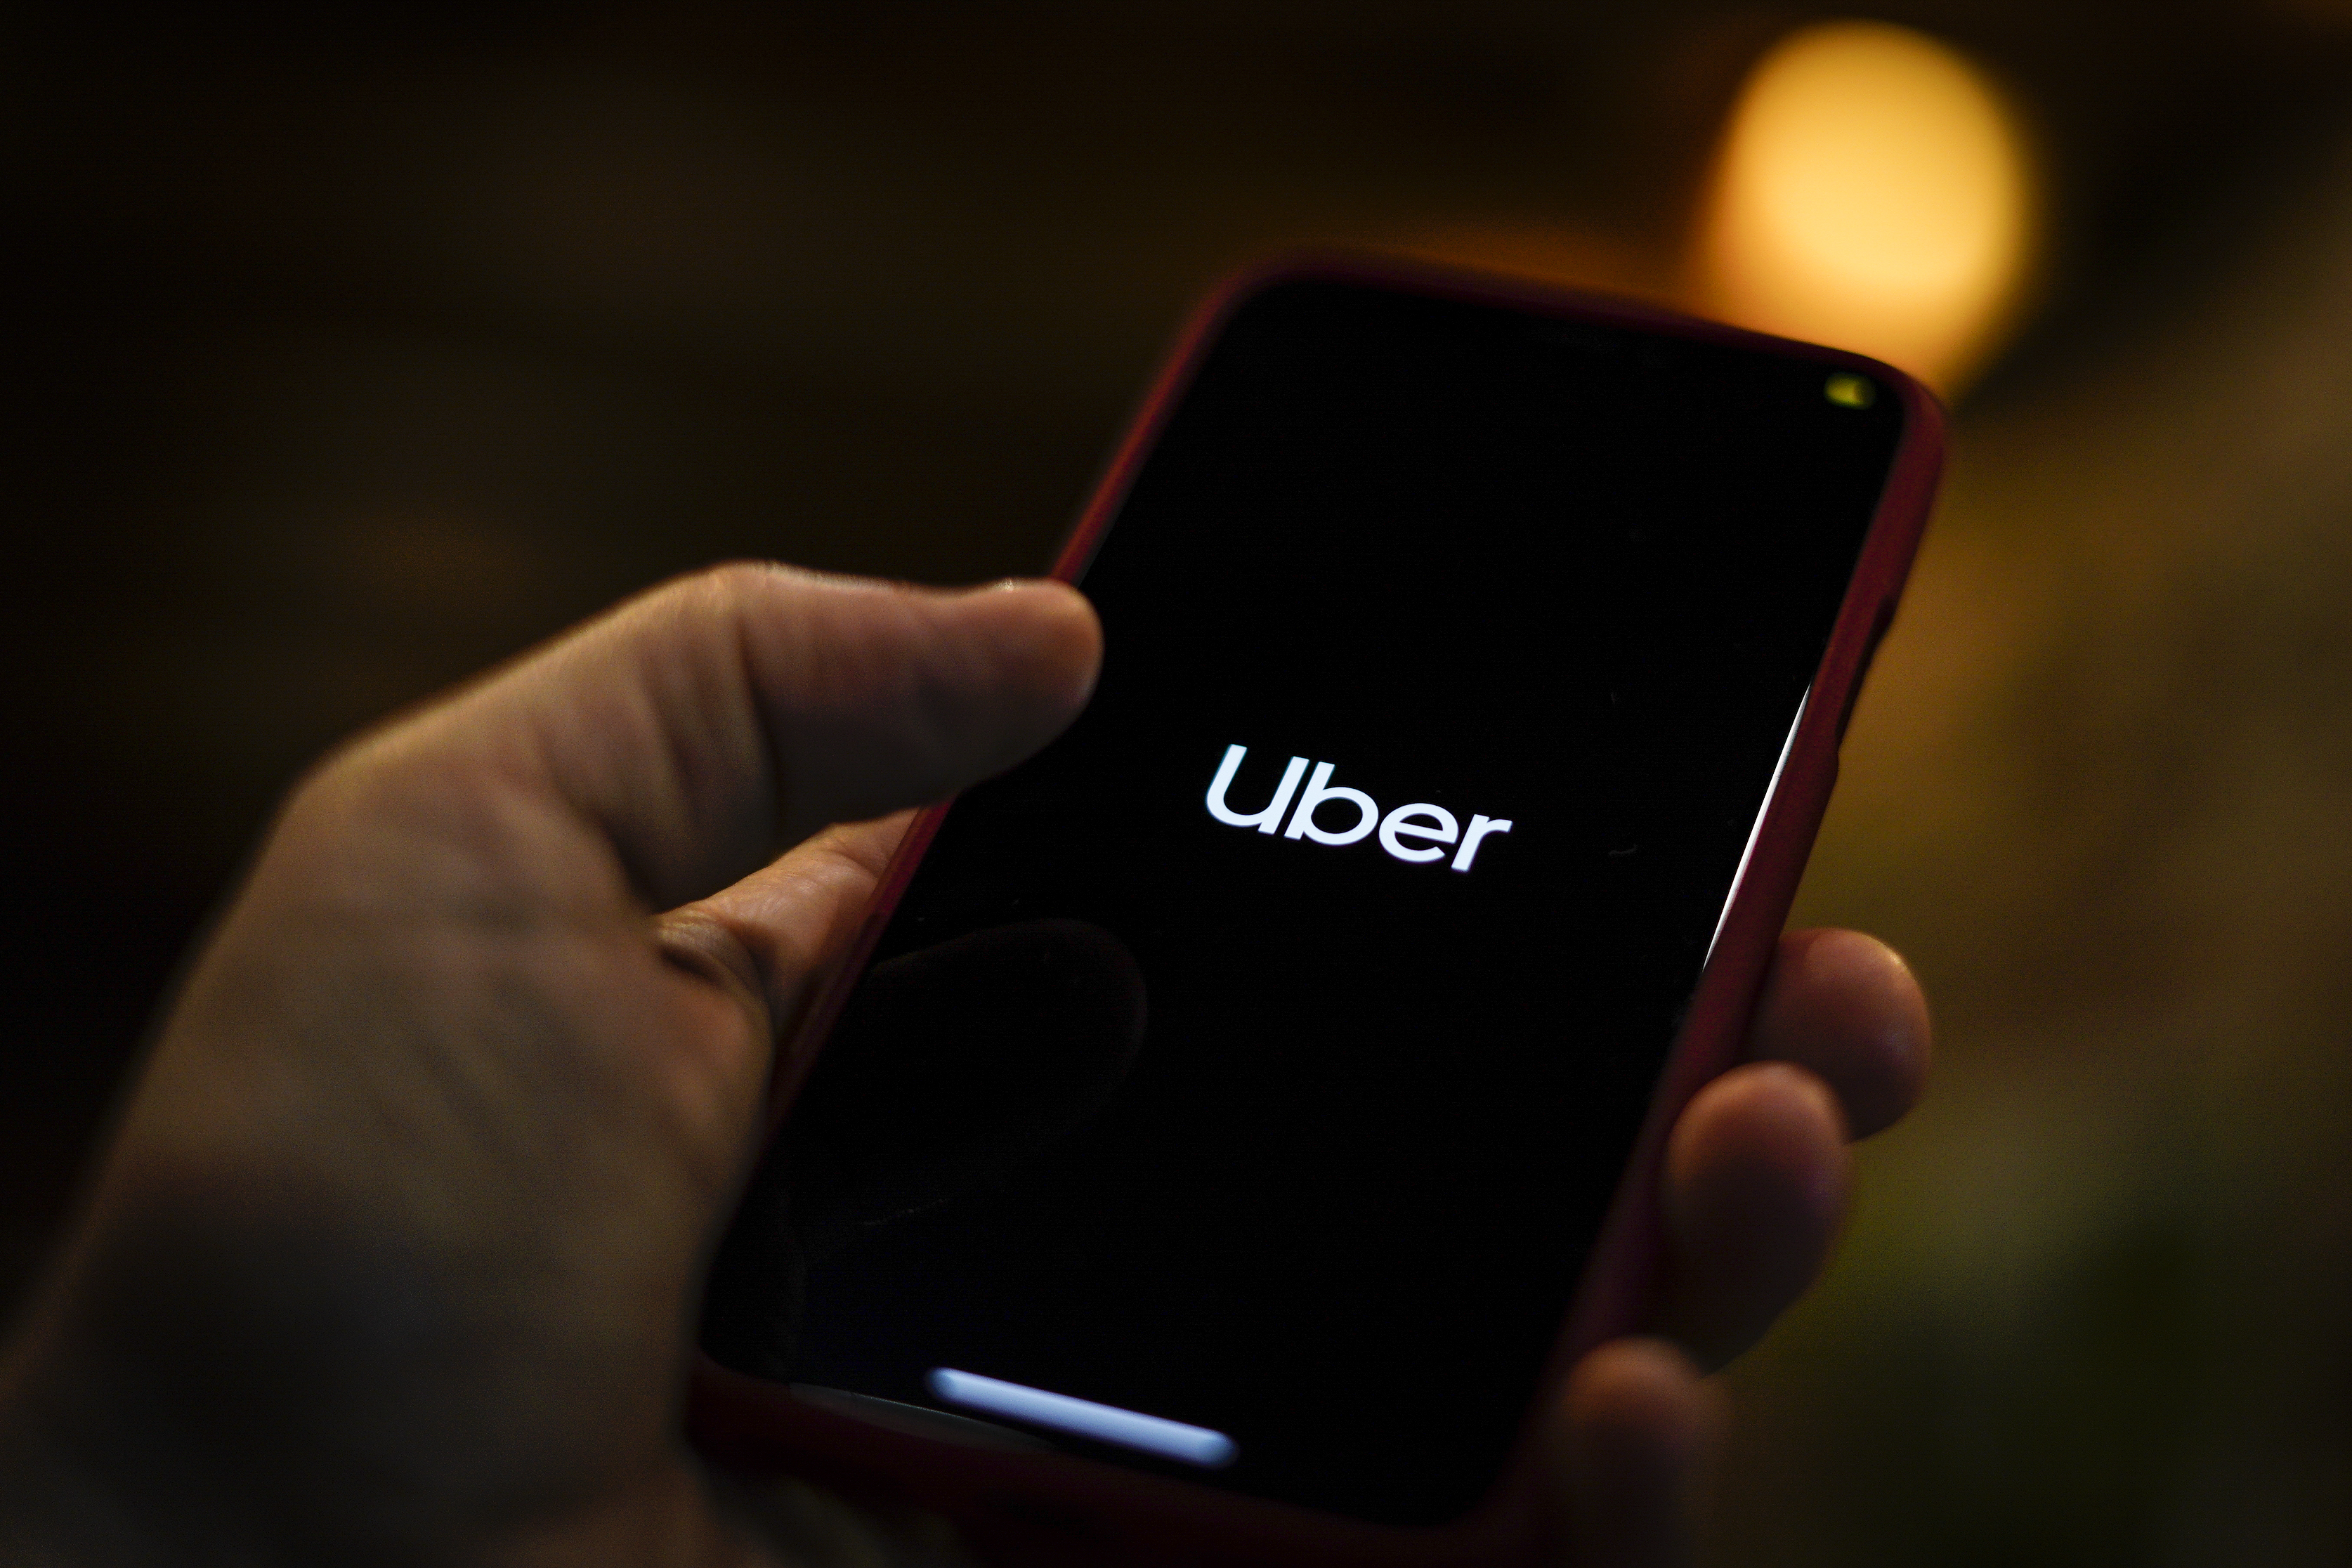 The Uber logo is seen displayed on a mobile device in this photo illustration in Warsaw, Poland on March 19, 2019. (Jaap Arriens—NurPhoto/Getty Images)